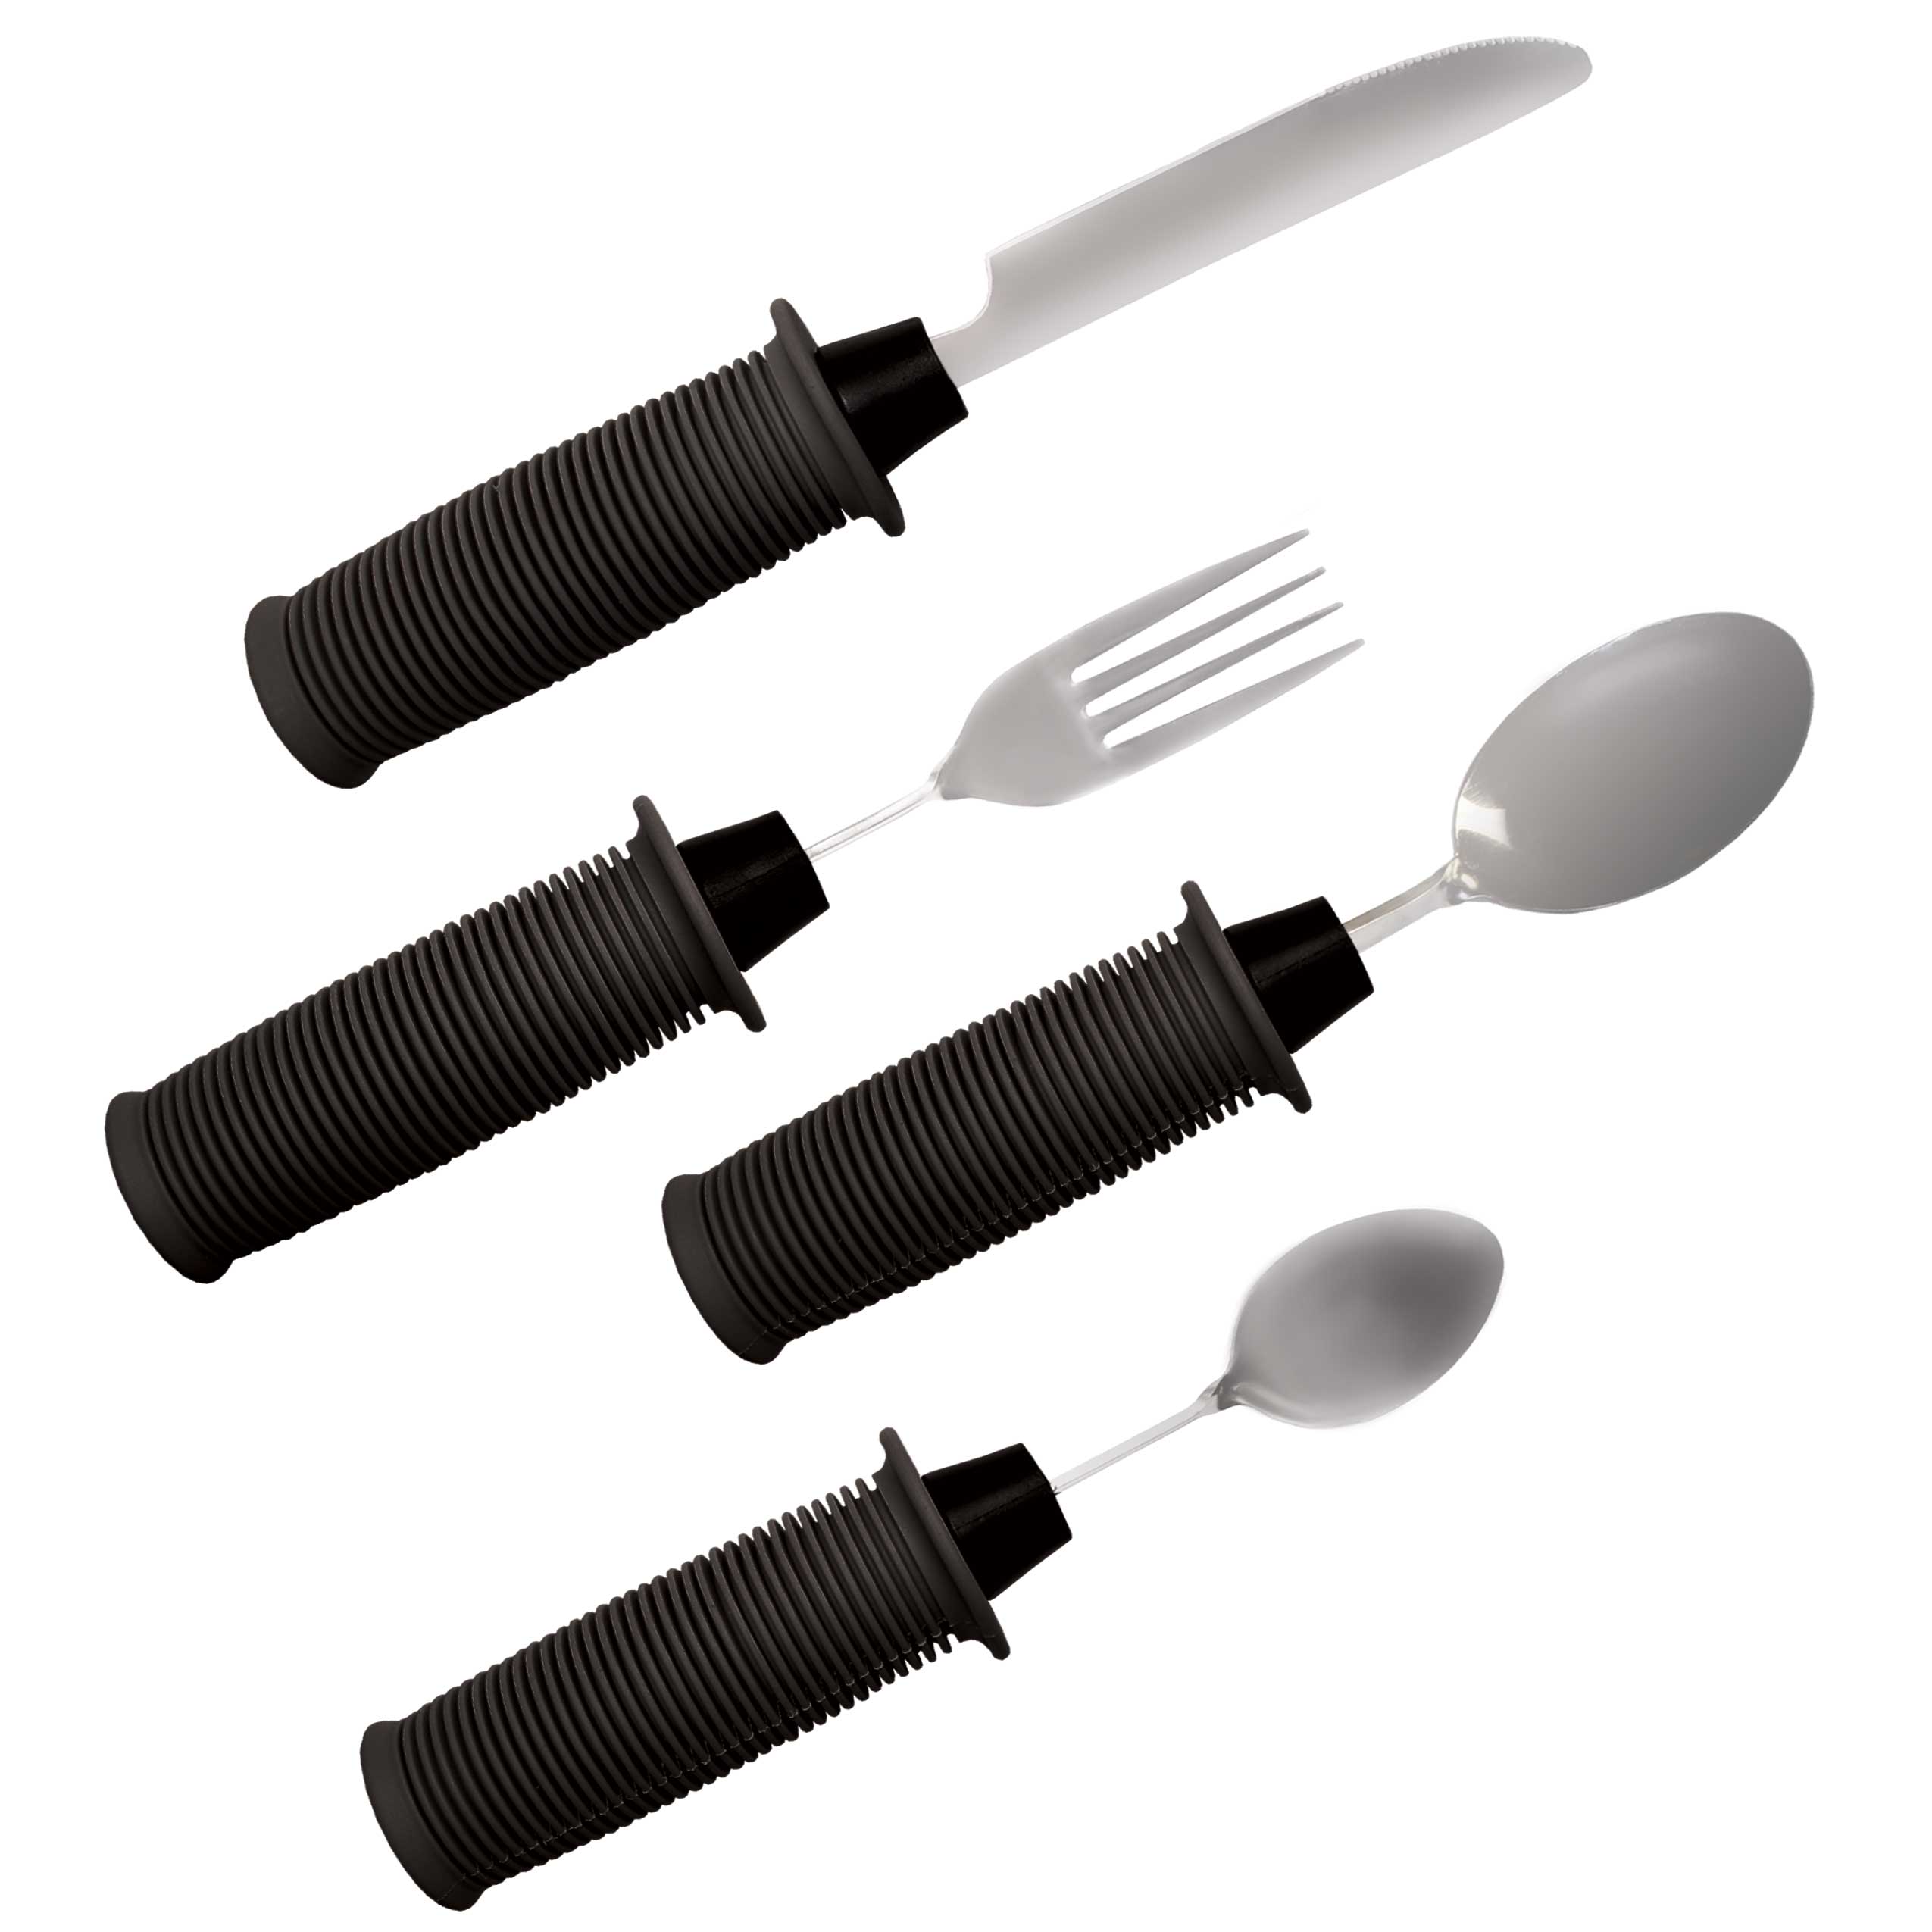 Big-Grip Bendable Weighted Utensils Set of 3:: bendable eating